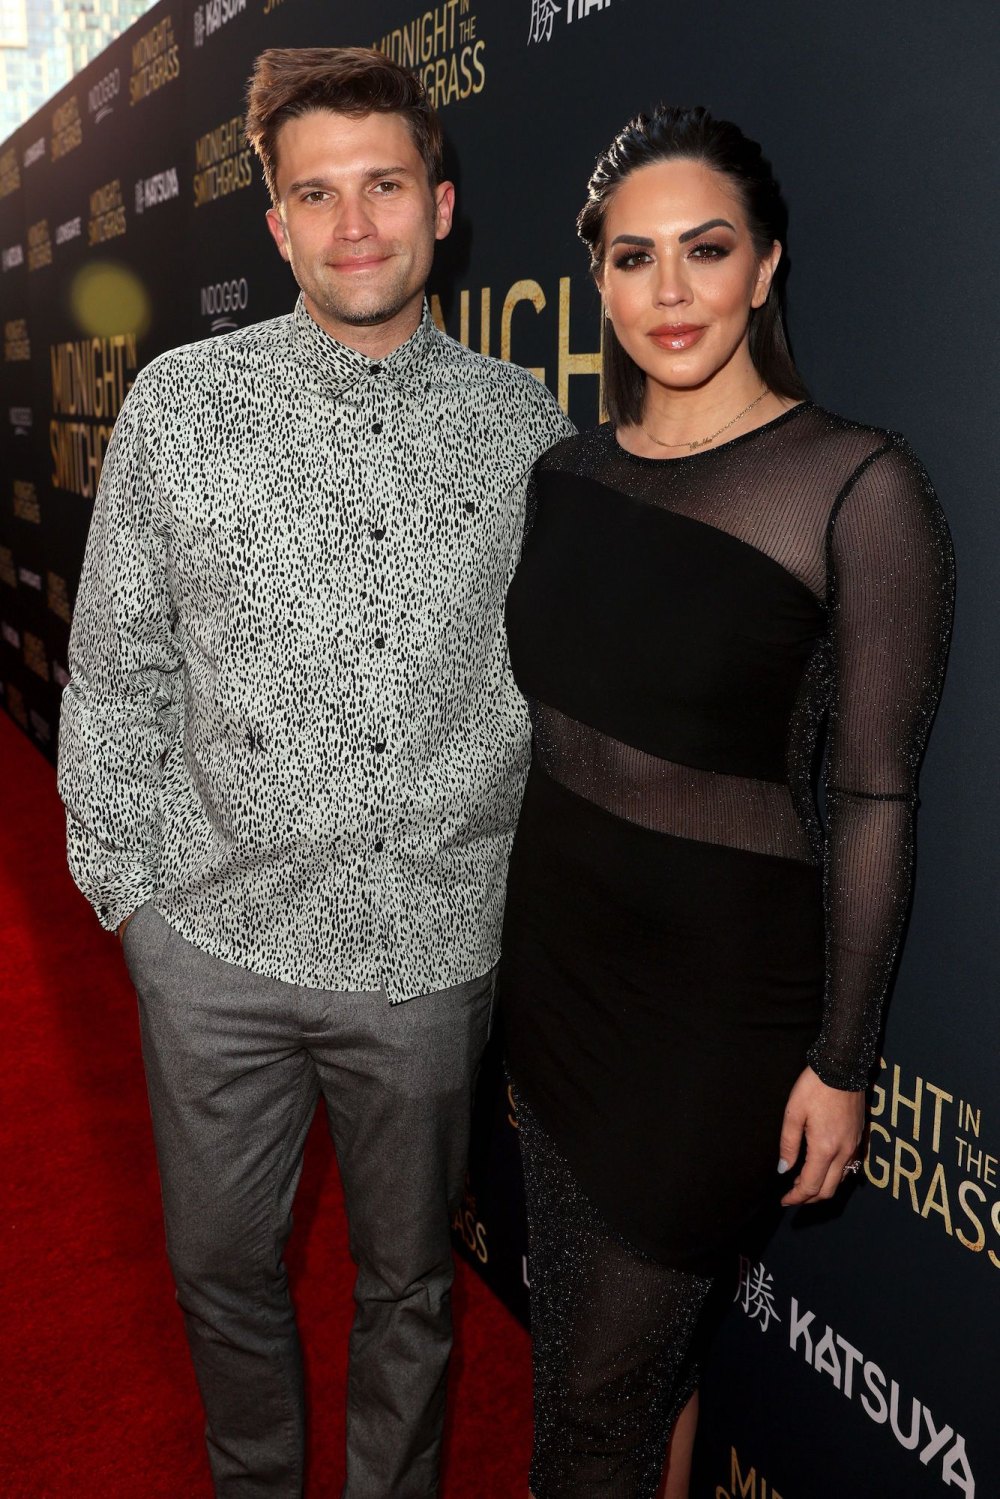 Pump Rules Katie Maloney Recalls How She Just Took It When Tom Schwartz Blamed Her for His Infidelity